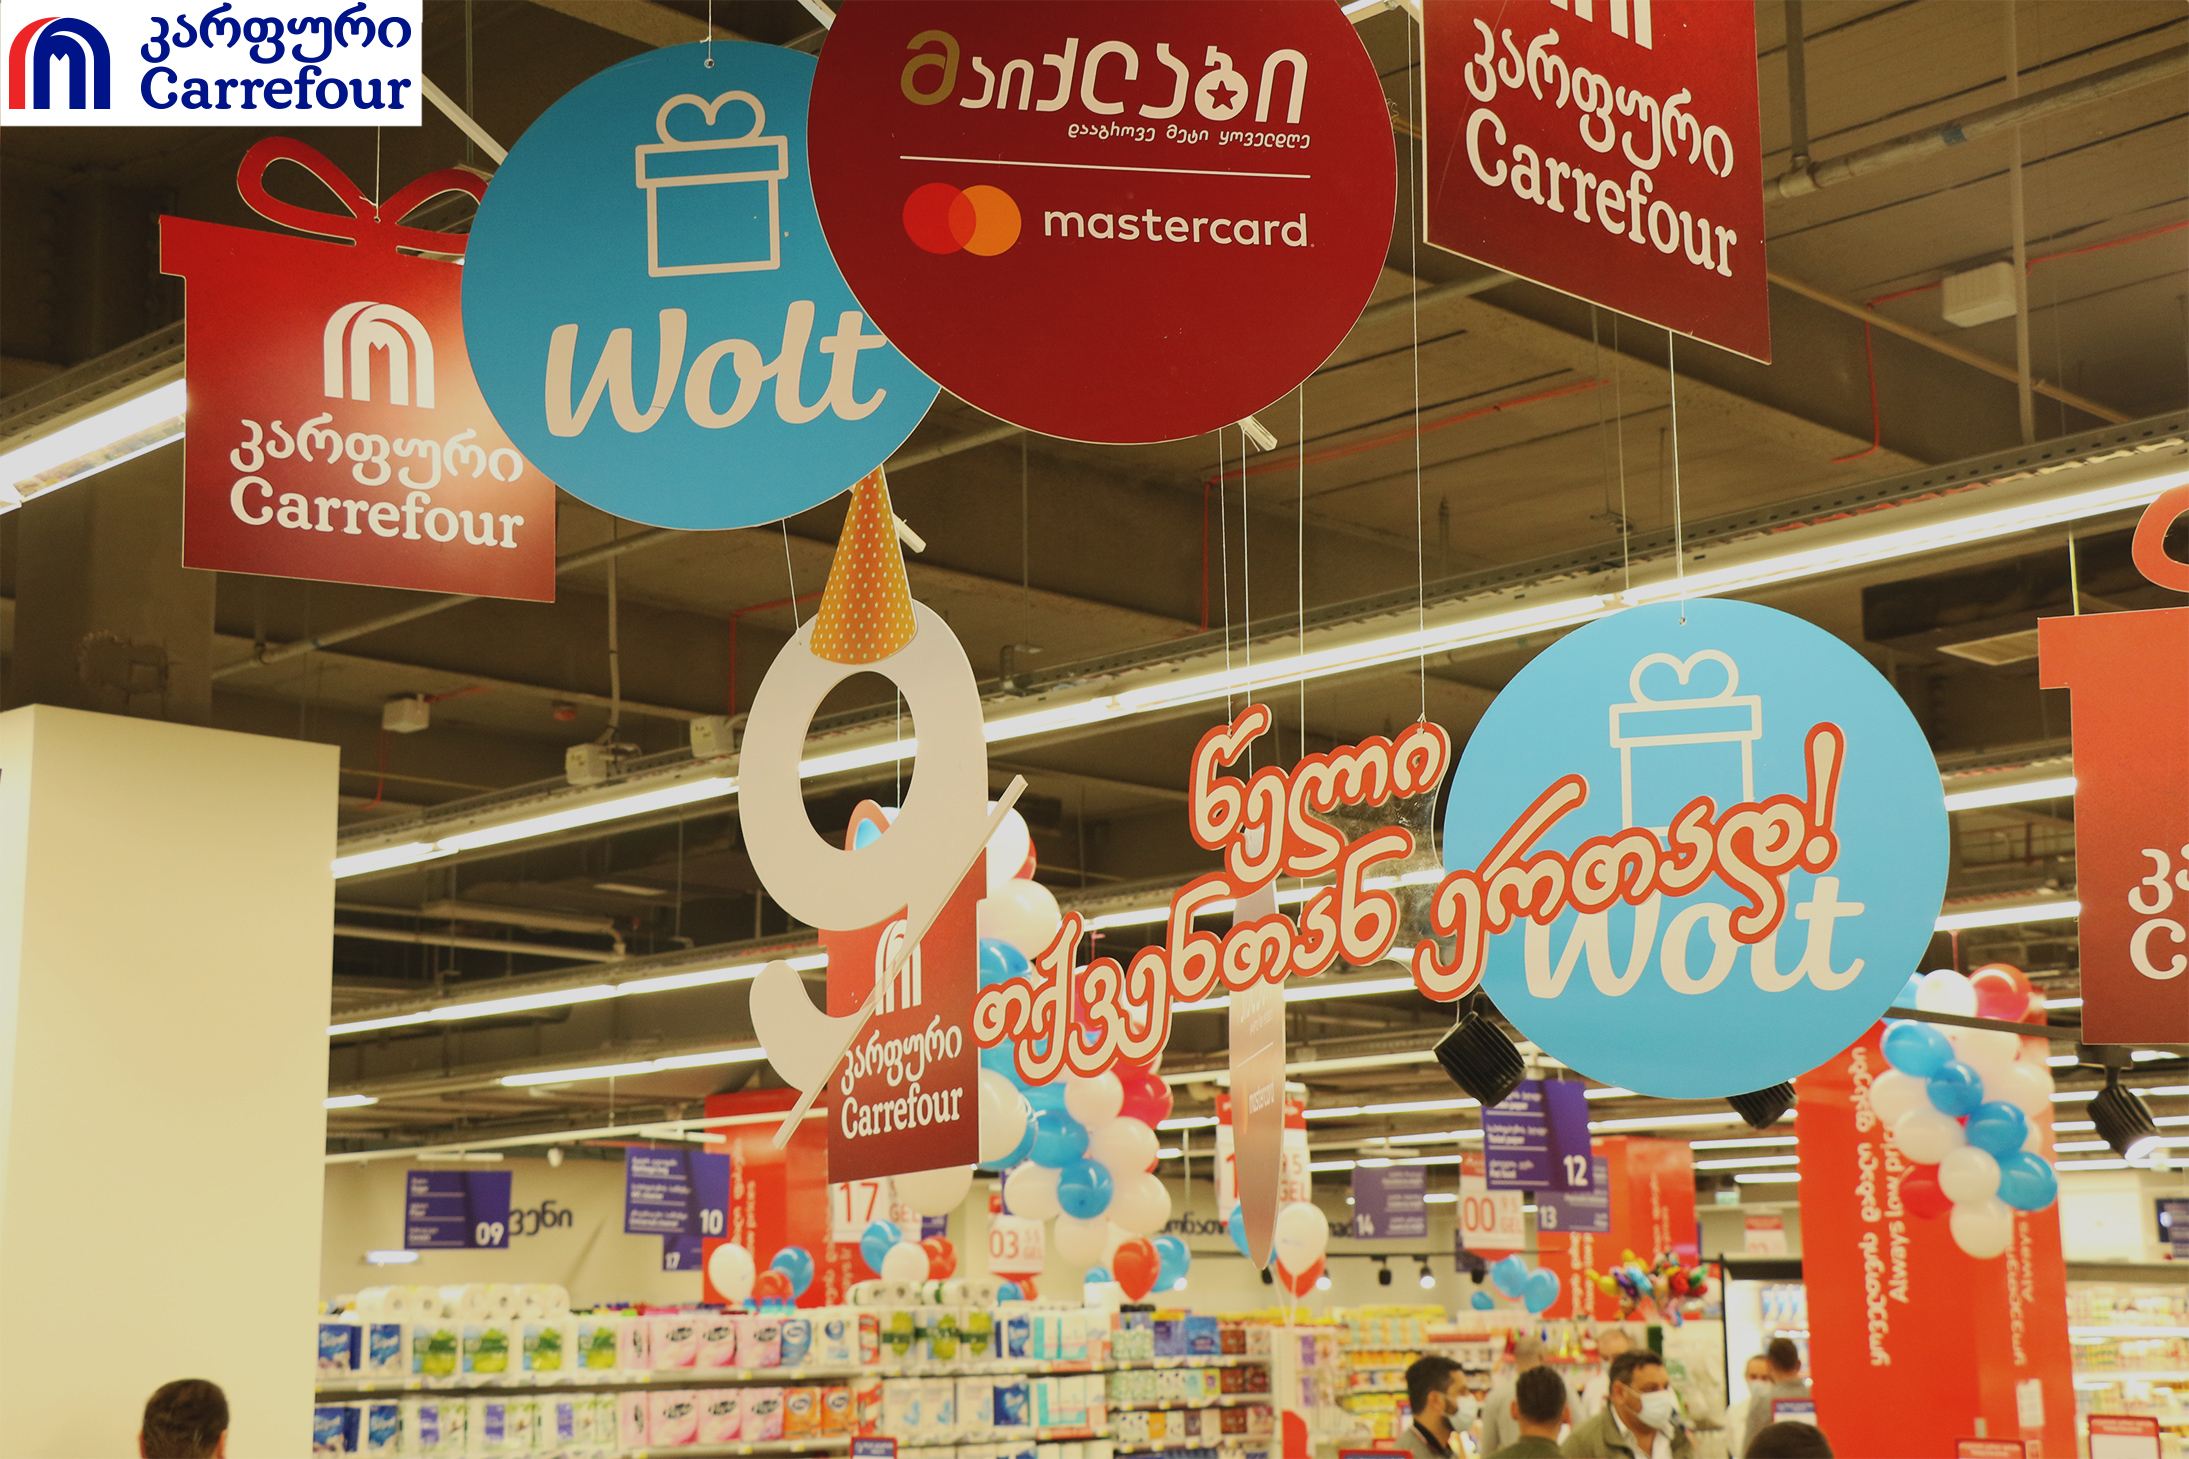 Home - Welcome at Carrefour